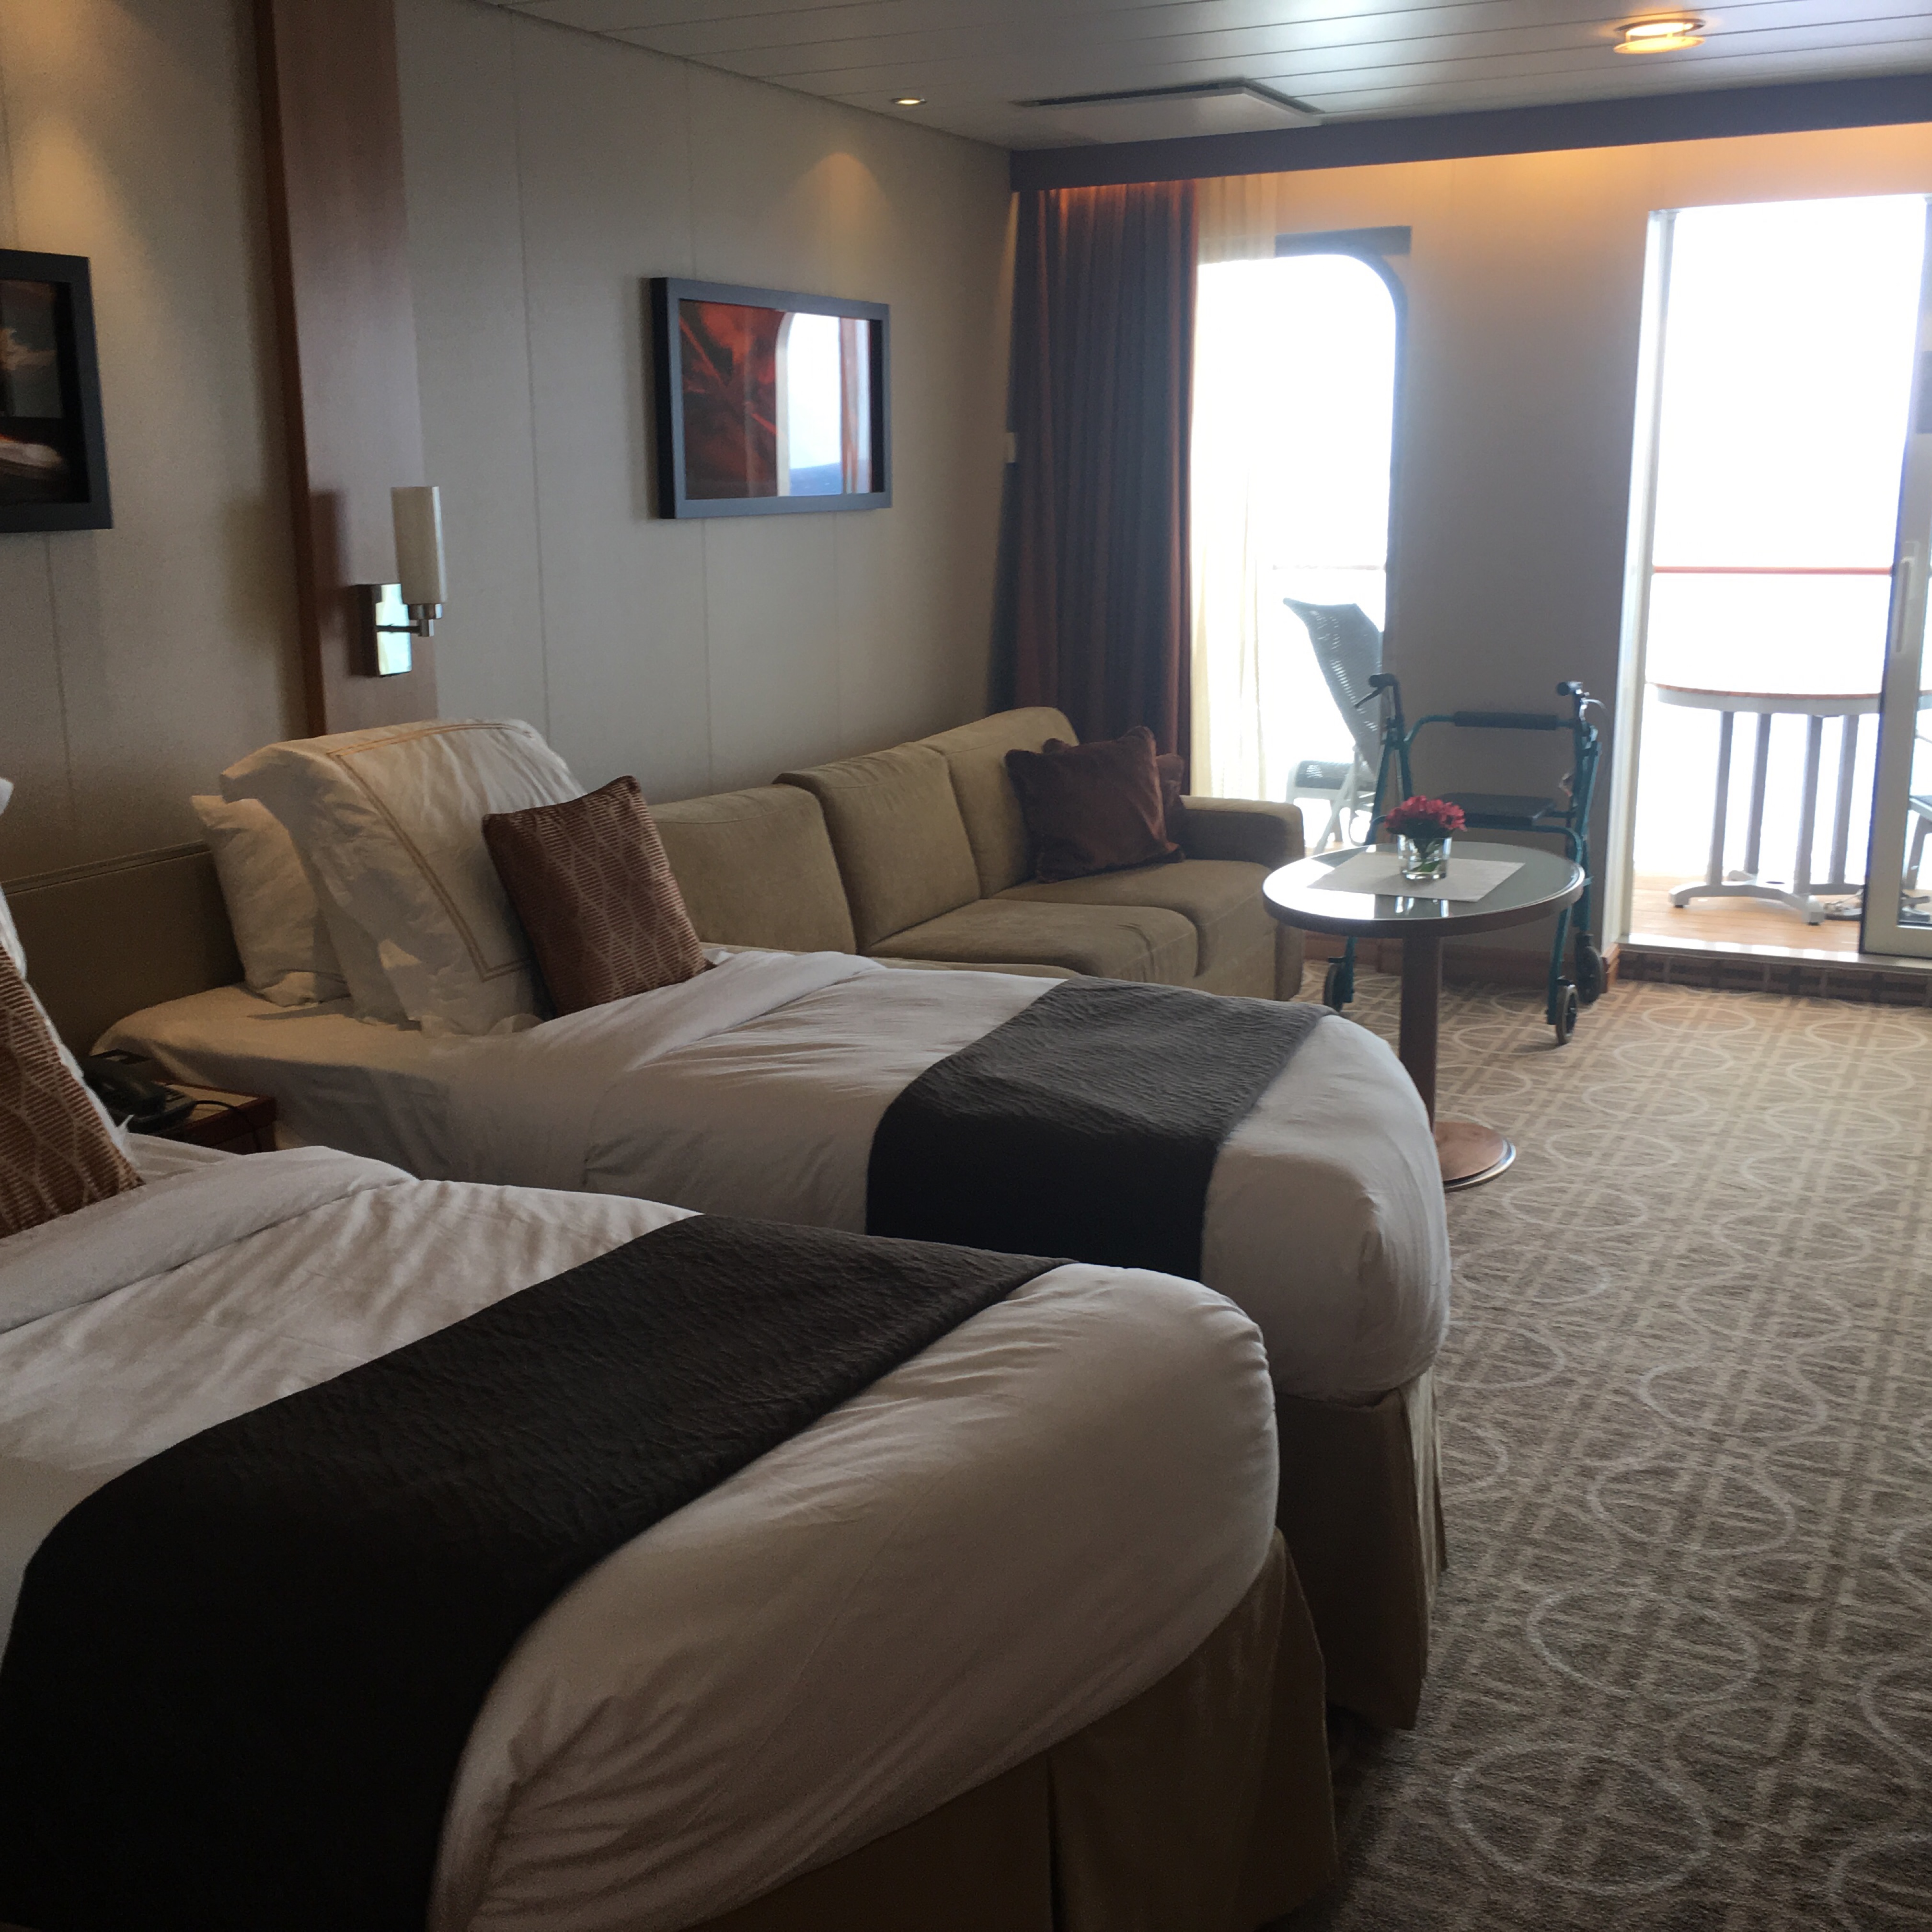 AquaClass Suite, Cabin Category TS, Celebrity Reflection